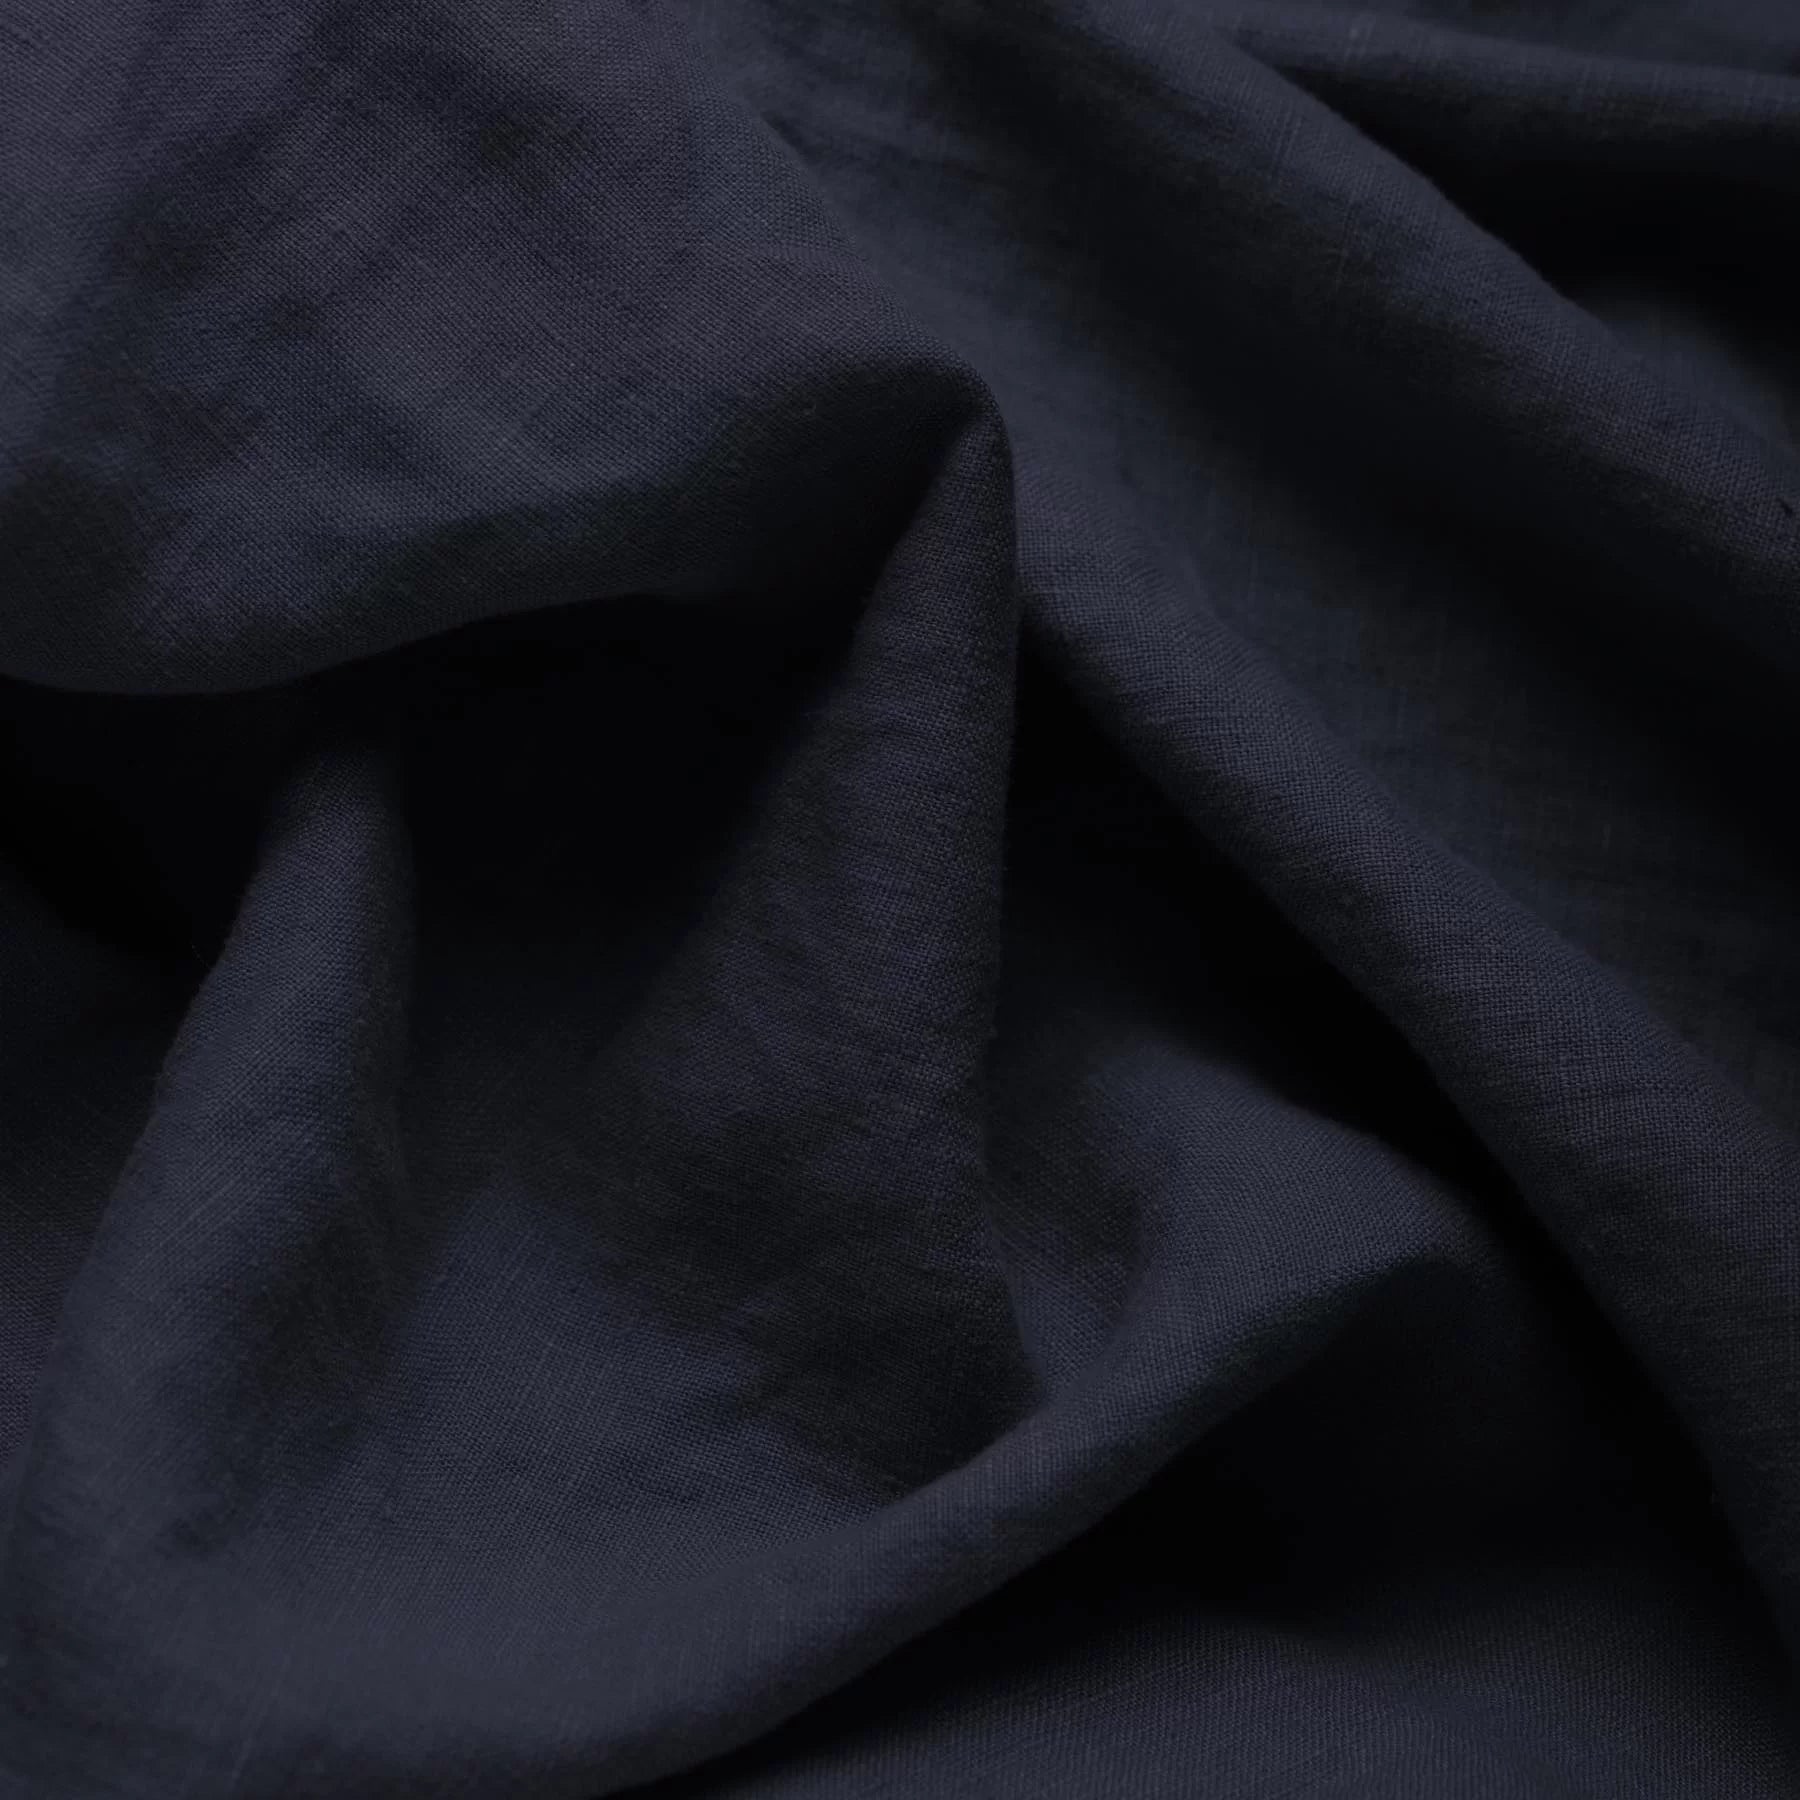 Stone Washed Linen - Navy